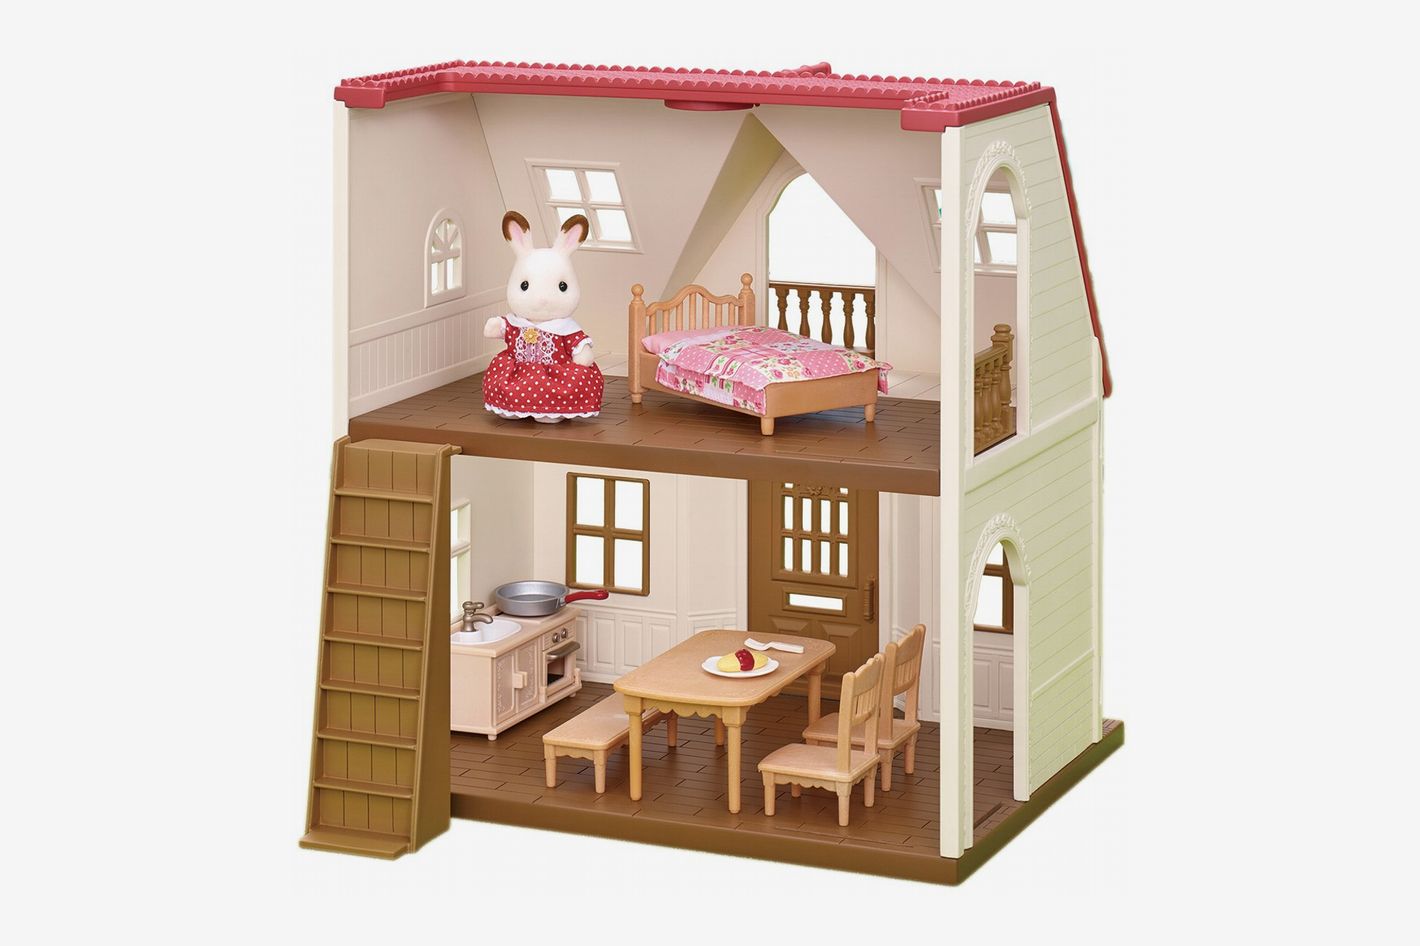 Wooden Dolls Toys Figures Furniture House Family Miniature 7